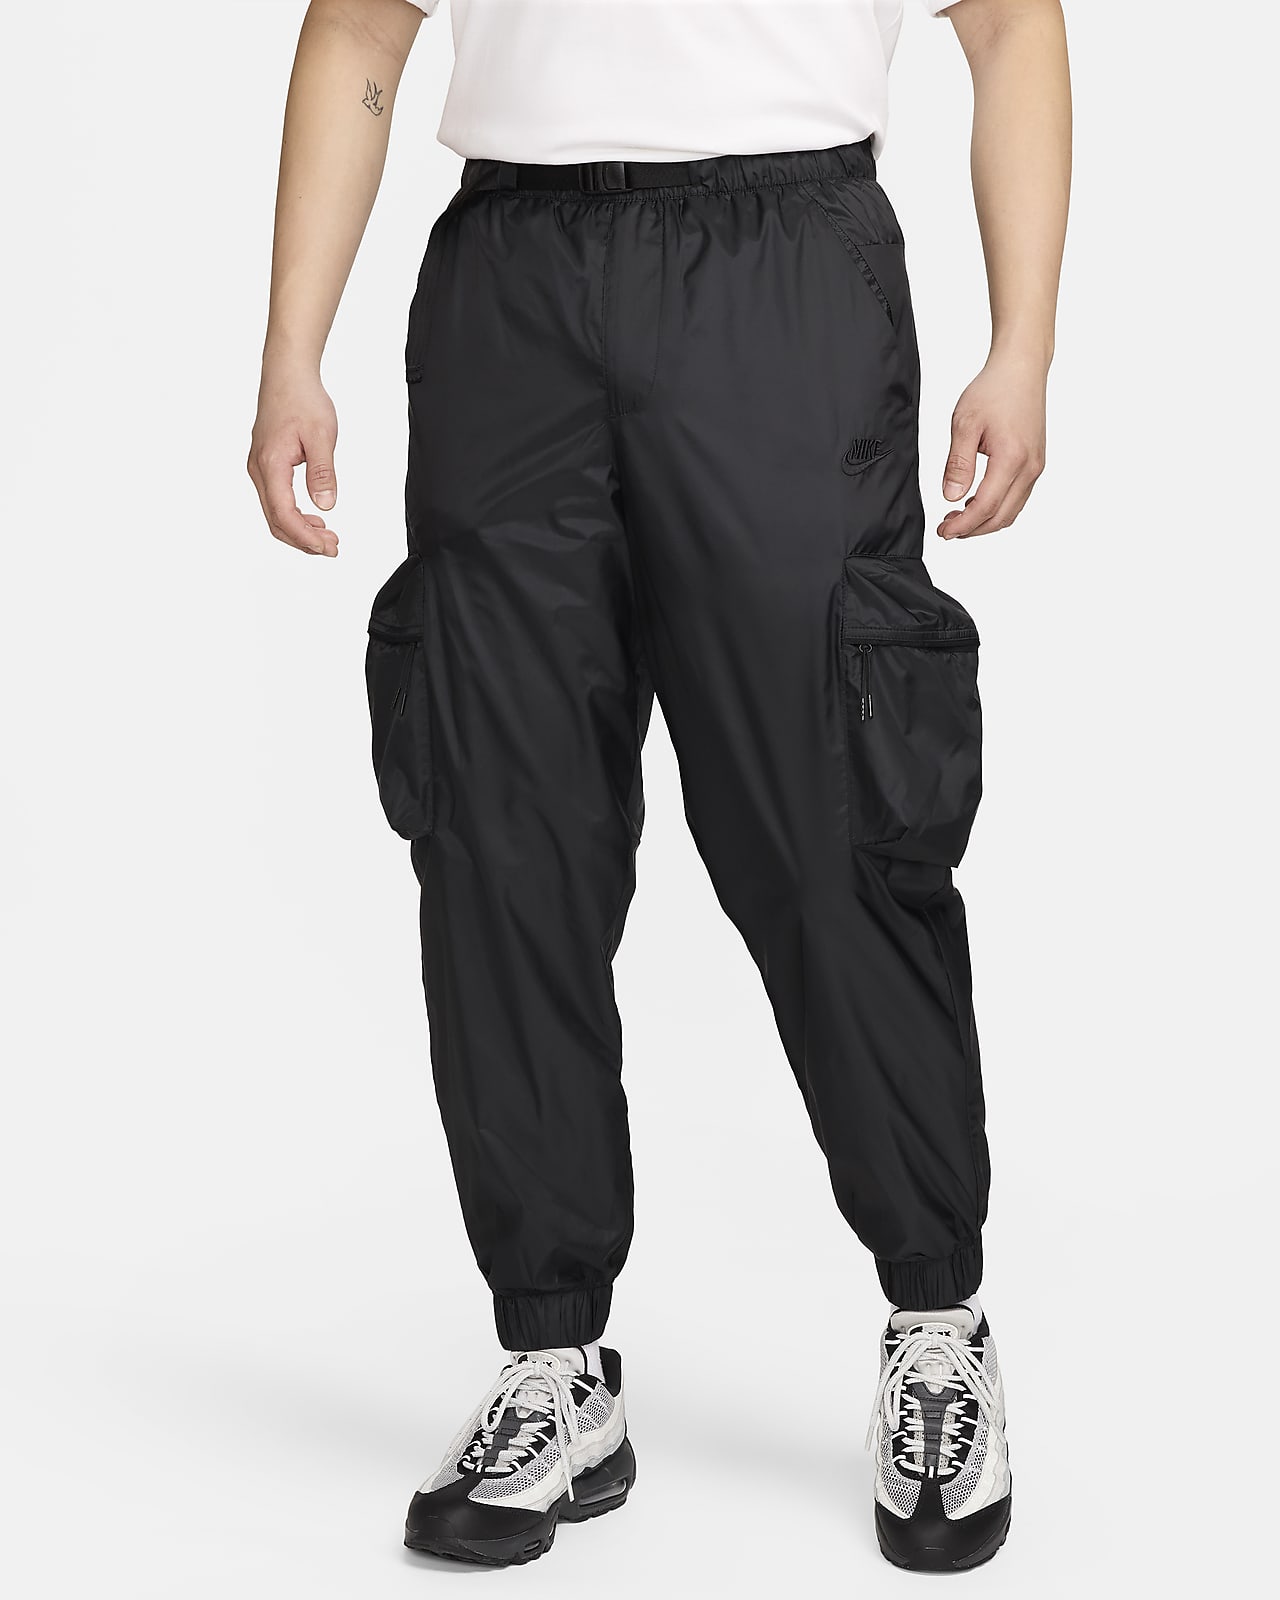 Nike Black Baggy Fit Mesh Lined Track Pants Size 2XL unisex